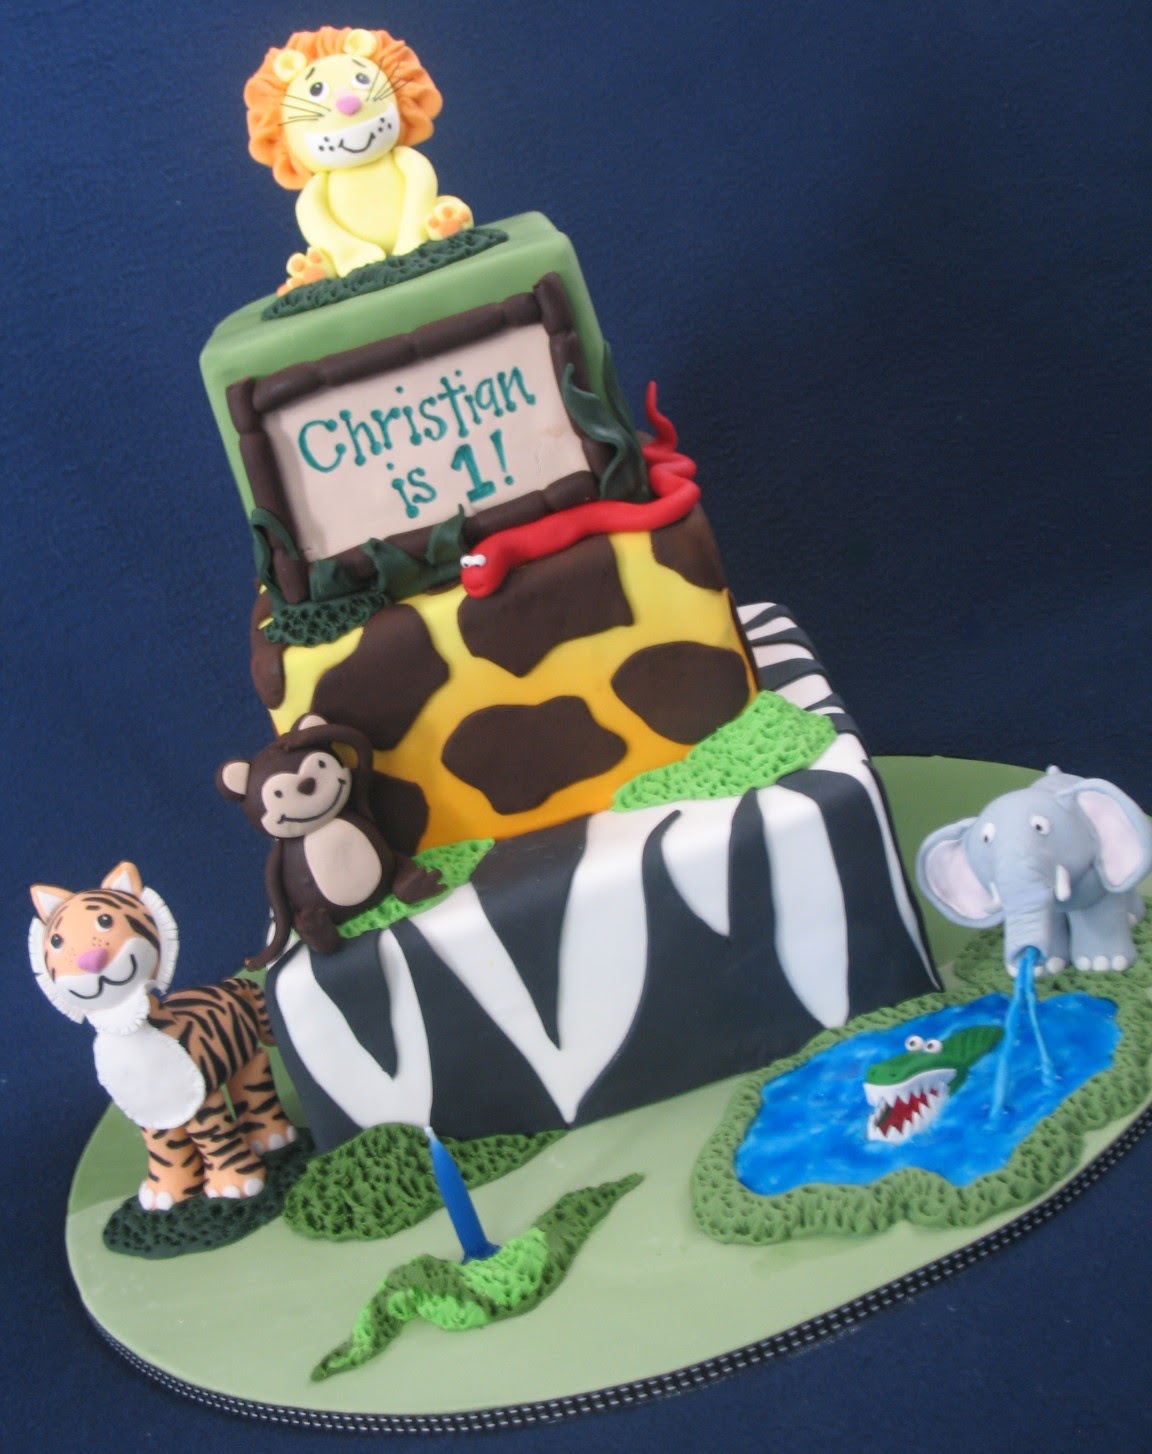 Blissfully Sweet A Jungle Themed 1st Birthday Cake For A Lion King